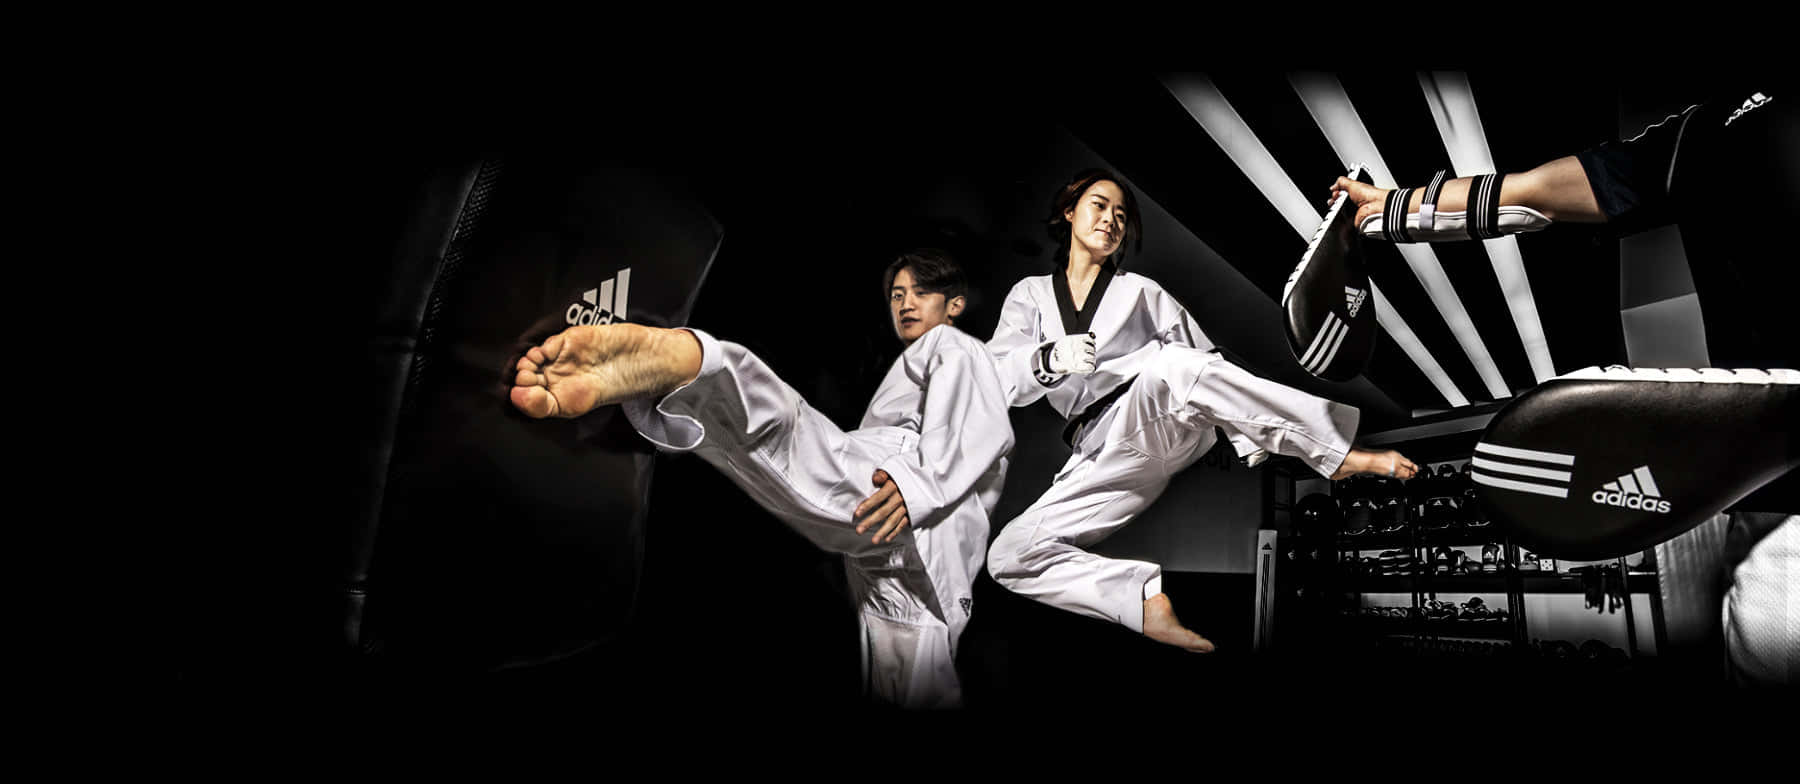 Martial Arts Practitioners Wearing Traditional Uniforms in Training Wallpaper